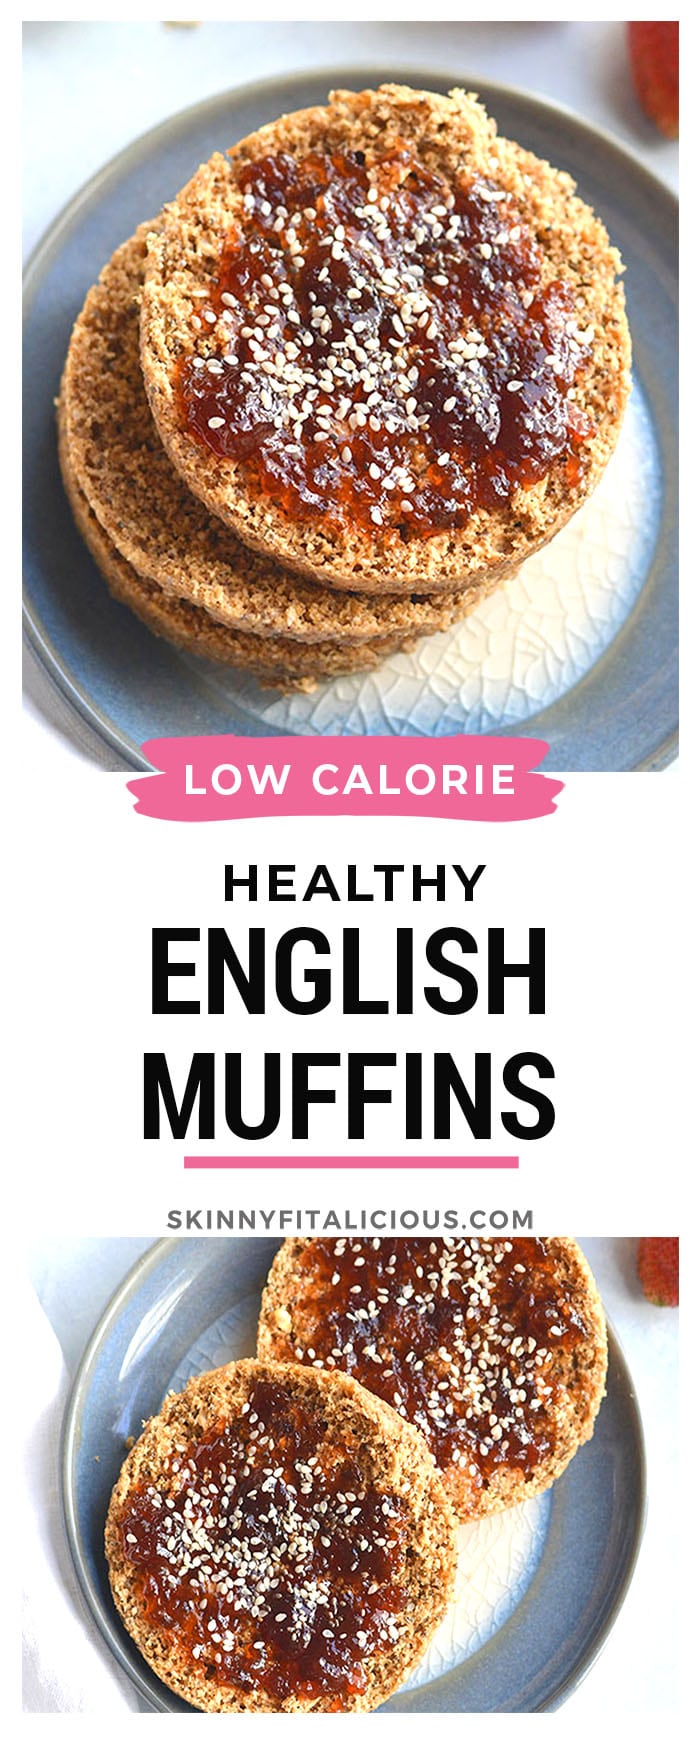 Gluten Free English Muffin! Made with 5 ingredients in the microwave. This breakfast bread doubles as sandwich bread and is a lighter and healthier way to enjoy bread!